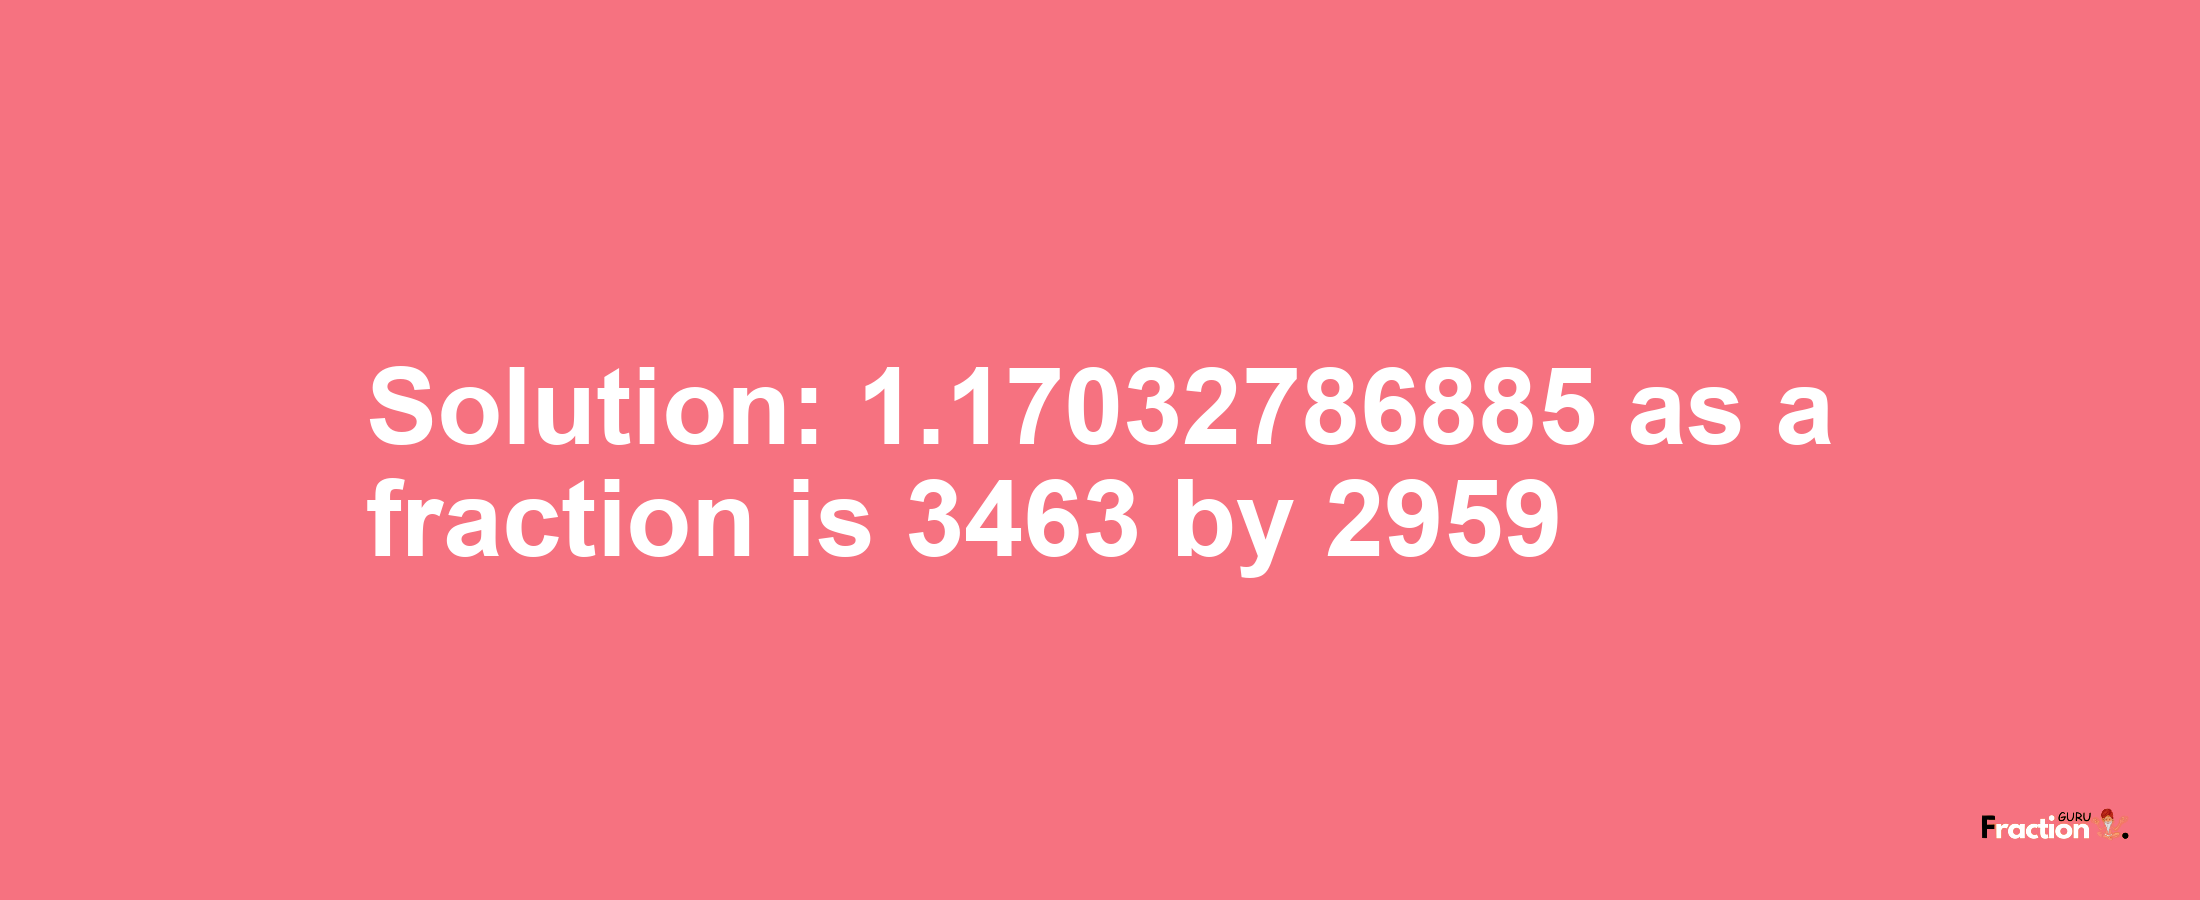 Solution:1.17032786885 as a fraction is 3463/2959